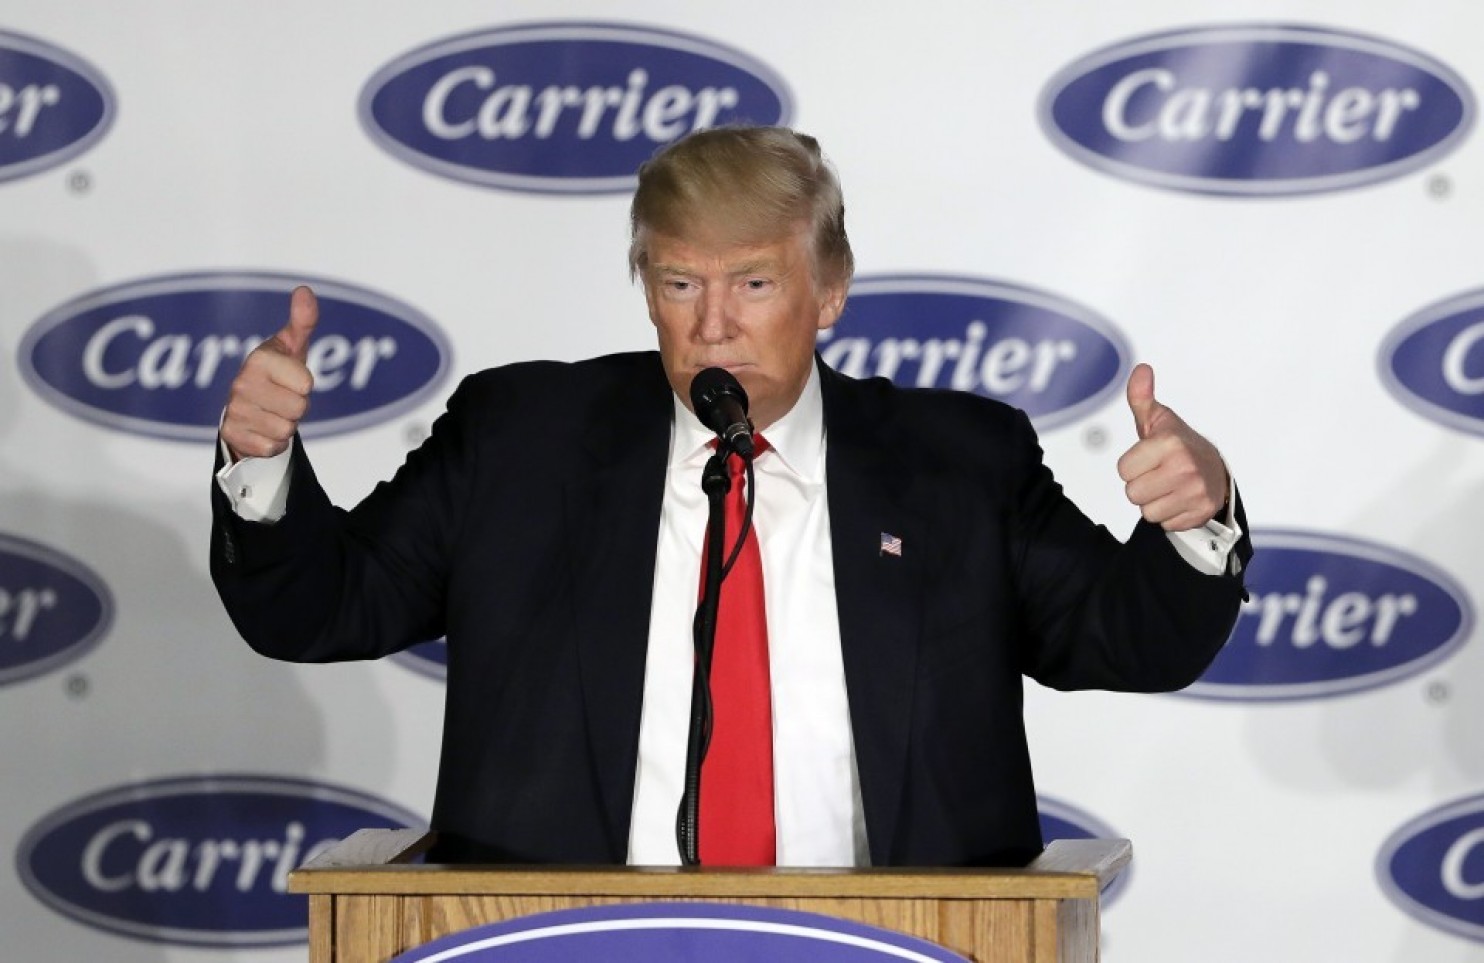 Carrier Union Leader On Donald Trumps Big Deal, "He Lied His A$$ Off